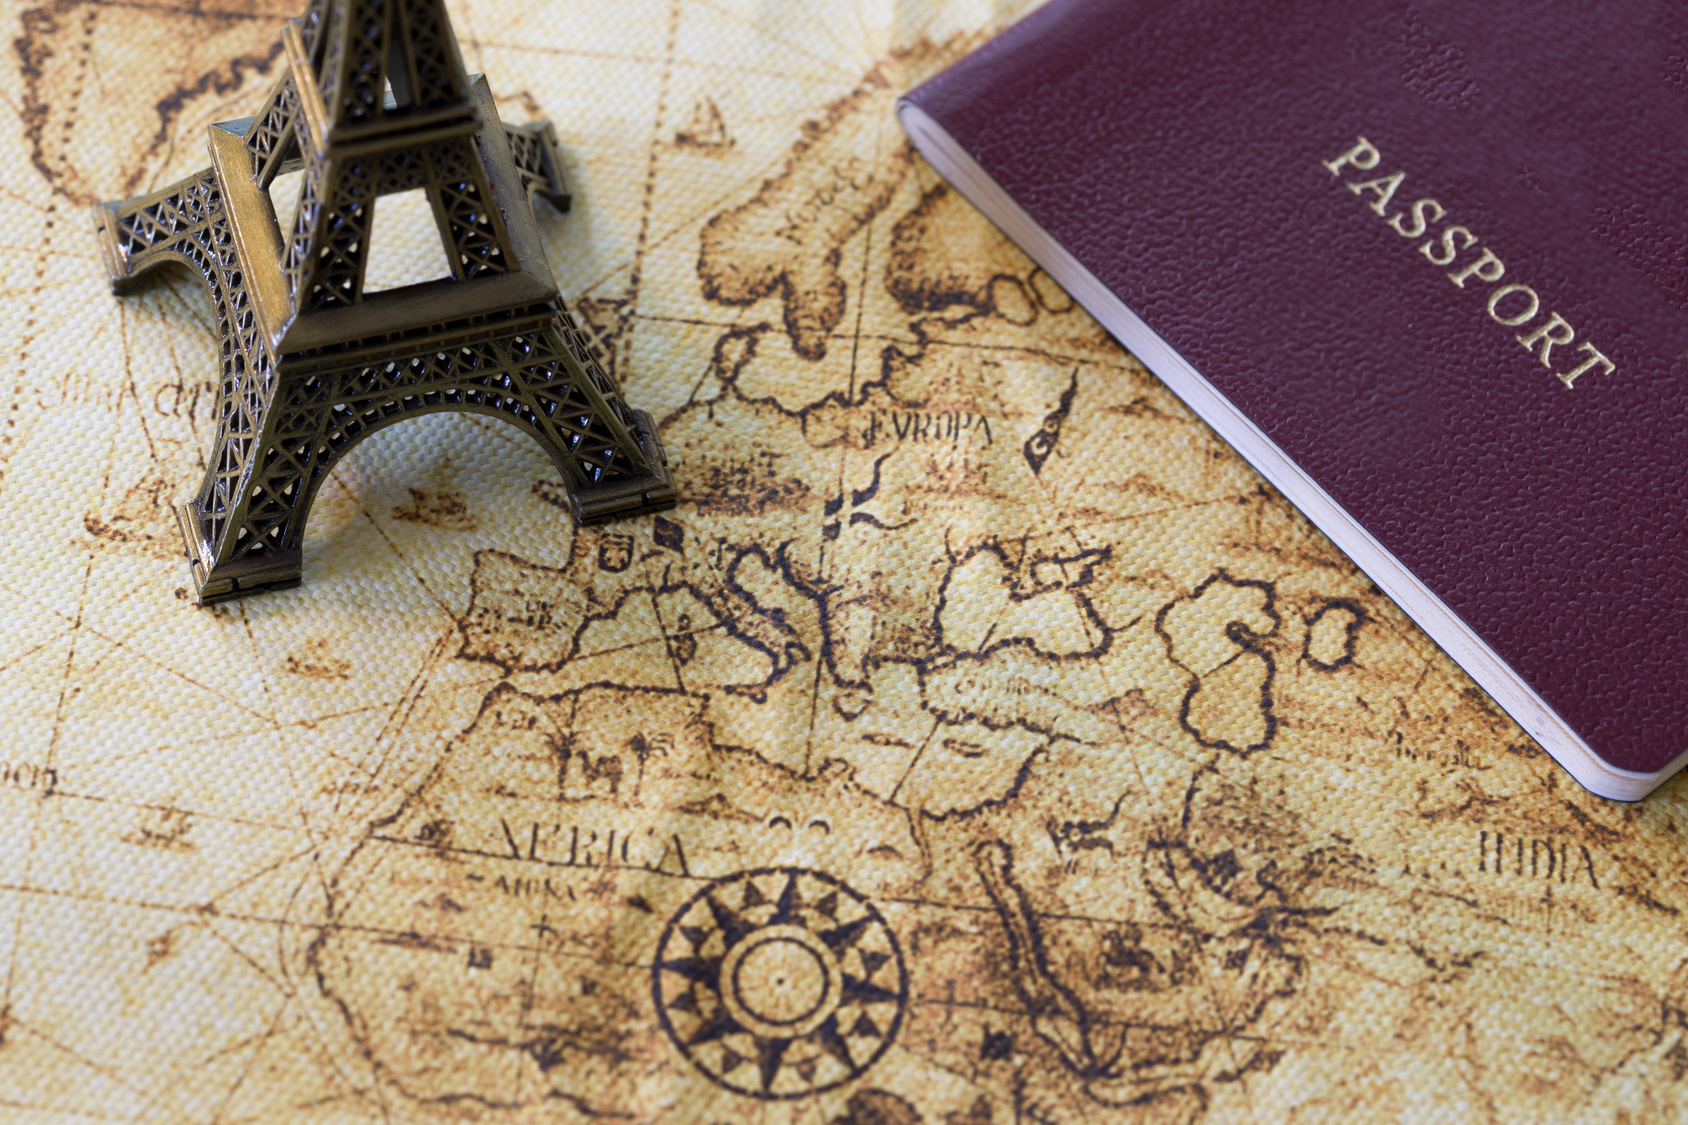 French Consulate in NY: Applying for a Long Stay Student Visa